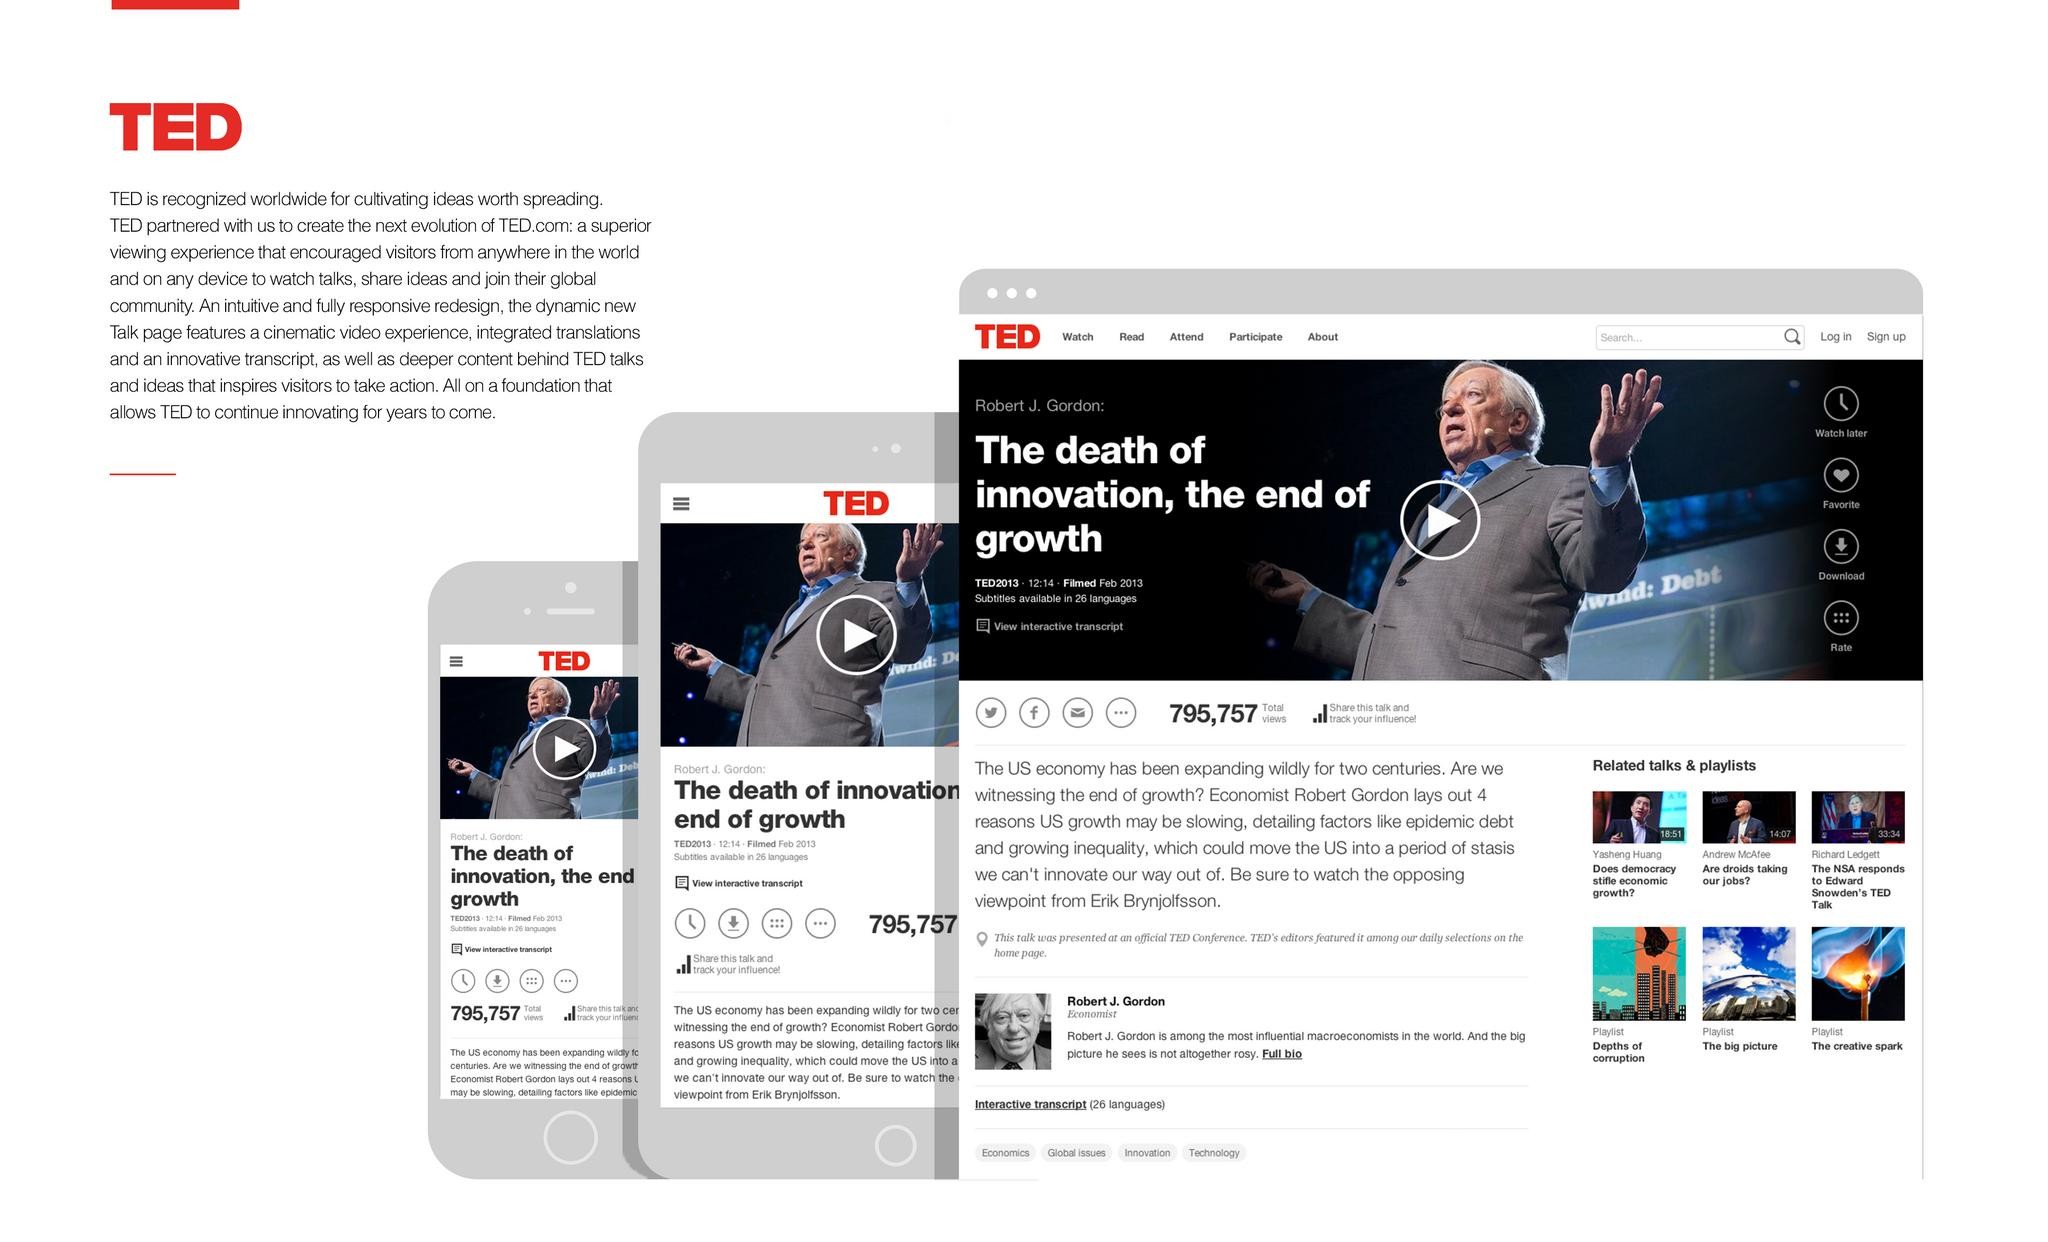 THE NEWLY REDESIGNED TED.COM